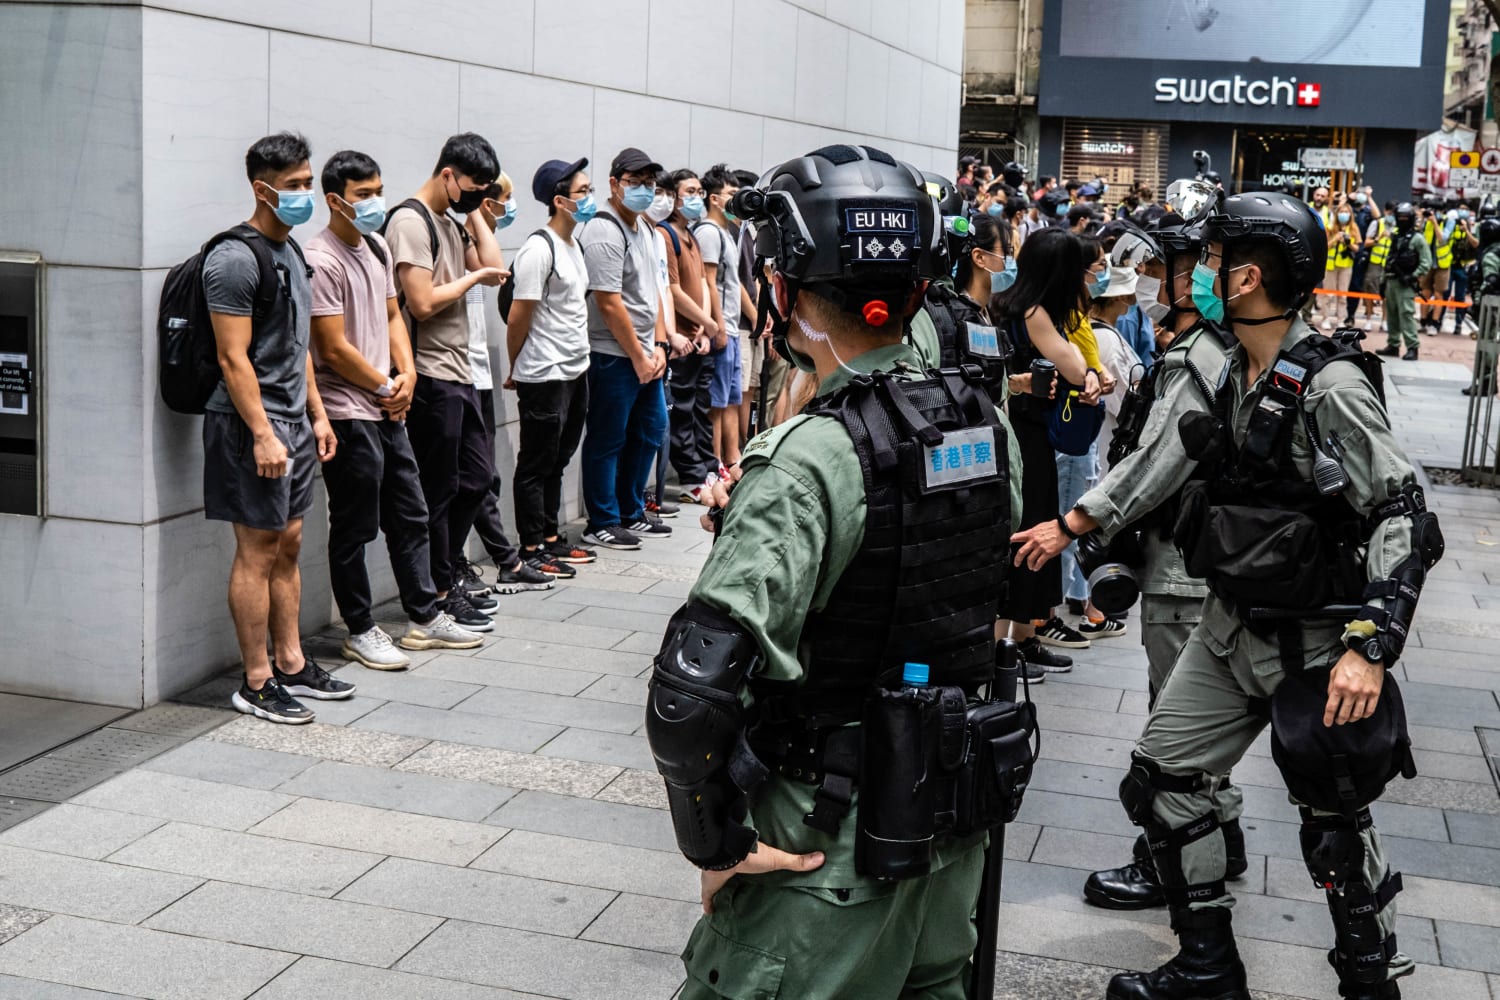 'The future is elsewhere' for Hong Kong's youth as the outlook is bleak, says analyst